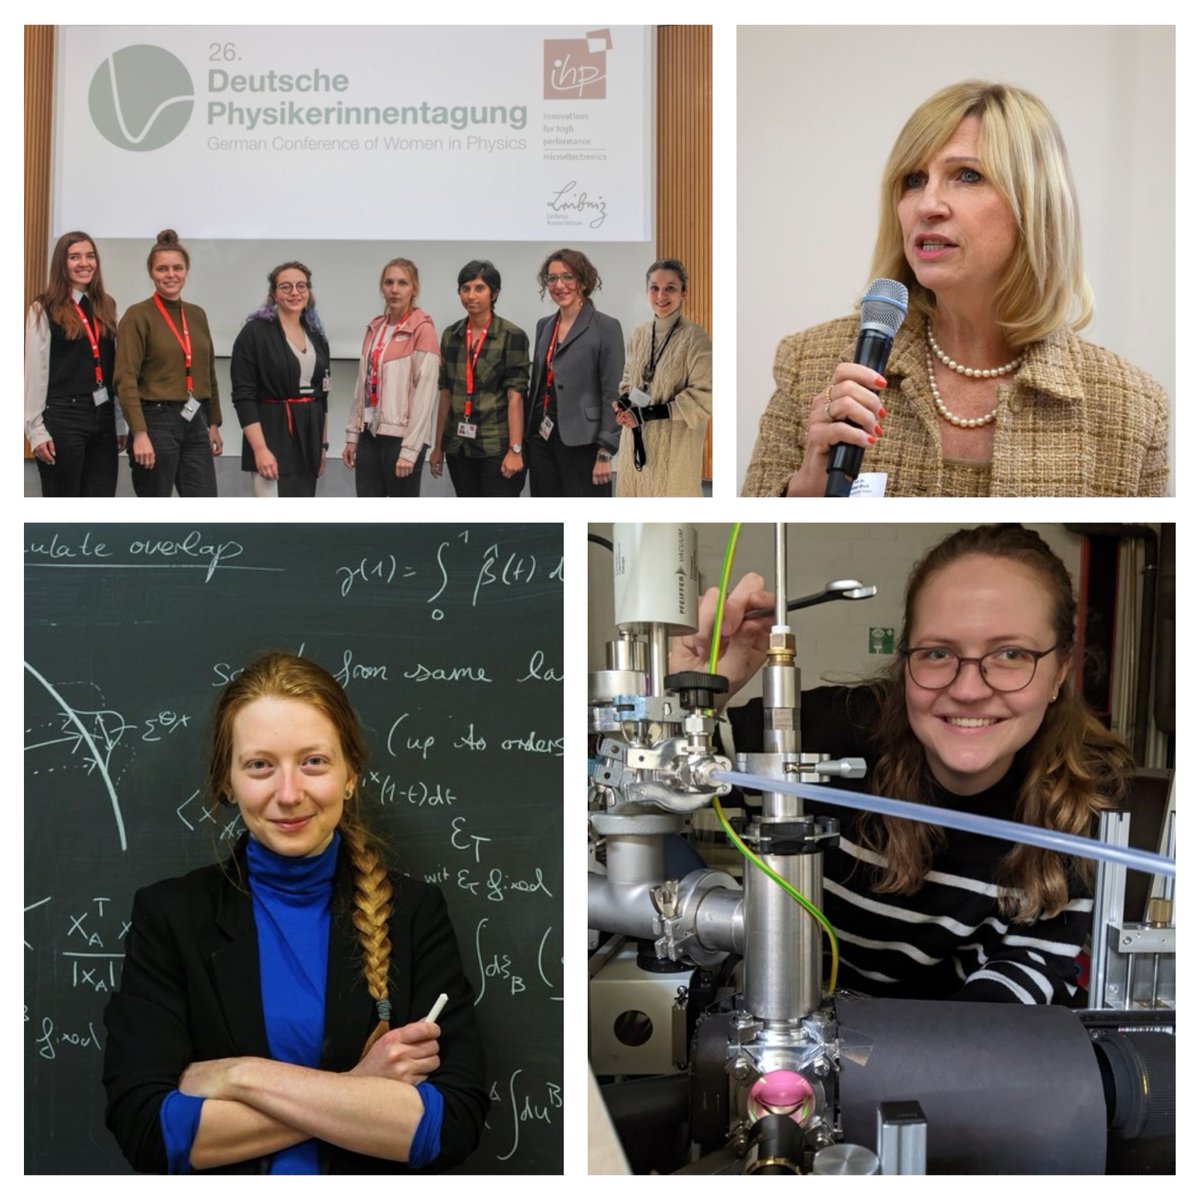 In May, I highlighted 4+ #womeninphysics for my #PhysikerinderWoche project. Learn more about Isabel @kieluni, Claudia @Sissaschool, Dorothée @JonesDay, & the 'Material Girls' @waferffo & their research fields! @BMBF_Bund #physikerin 👩‍💻👉 dpg-physik.de/vereinigungen/…